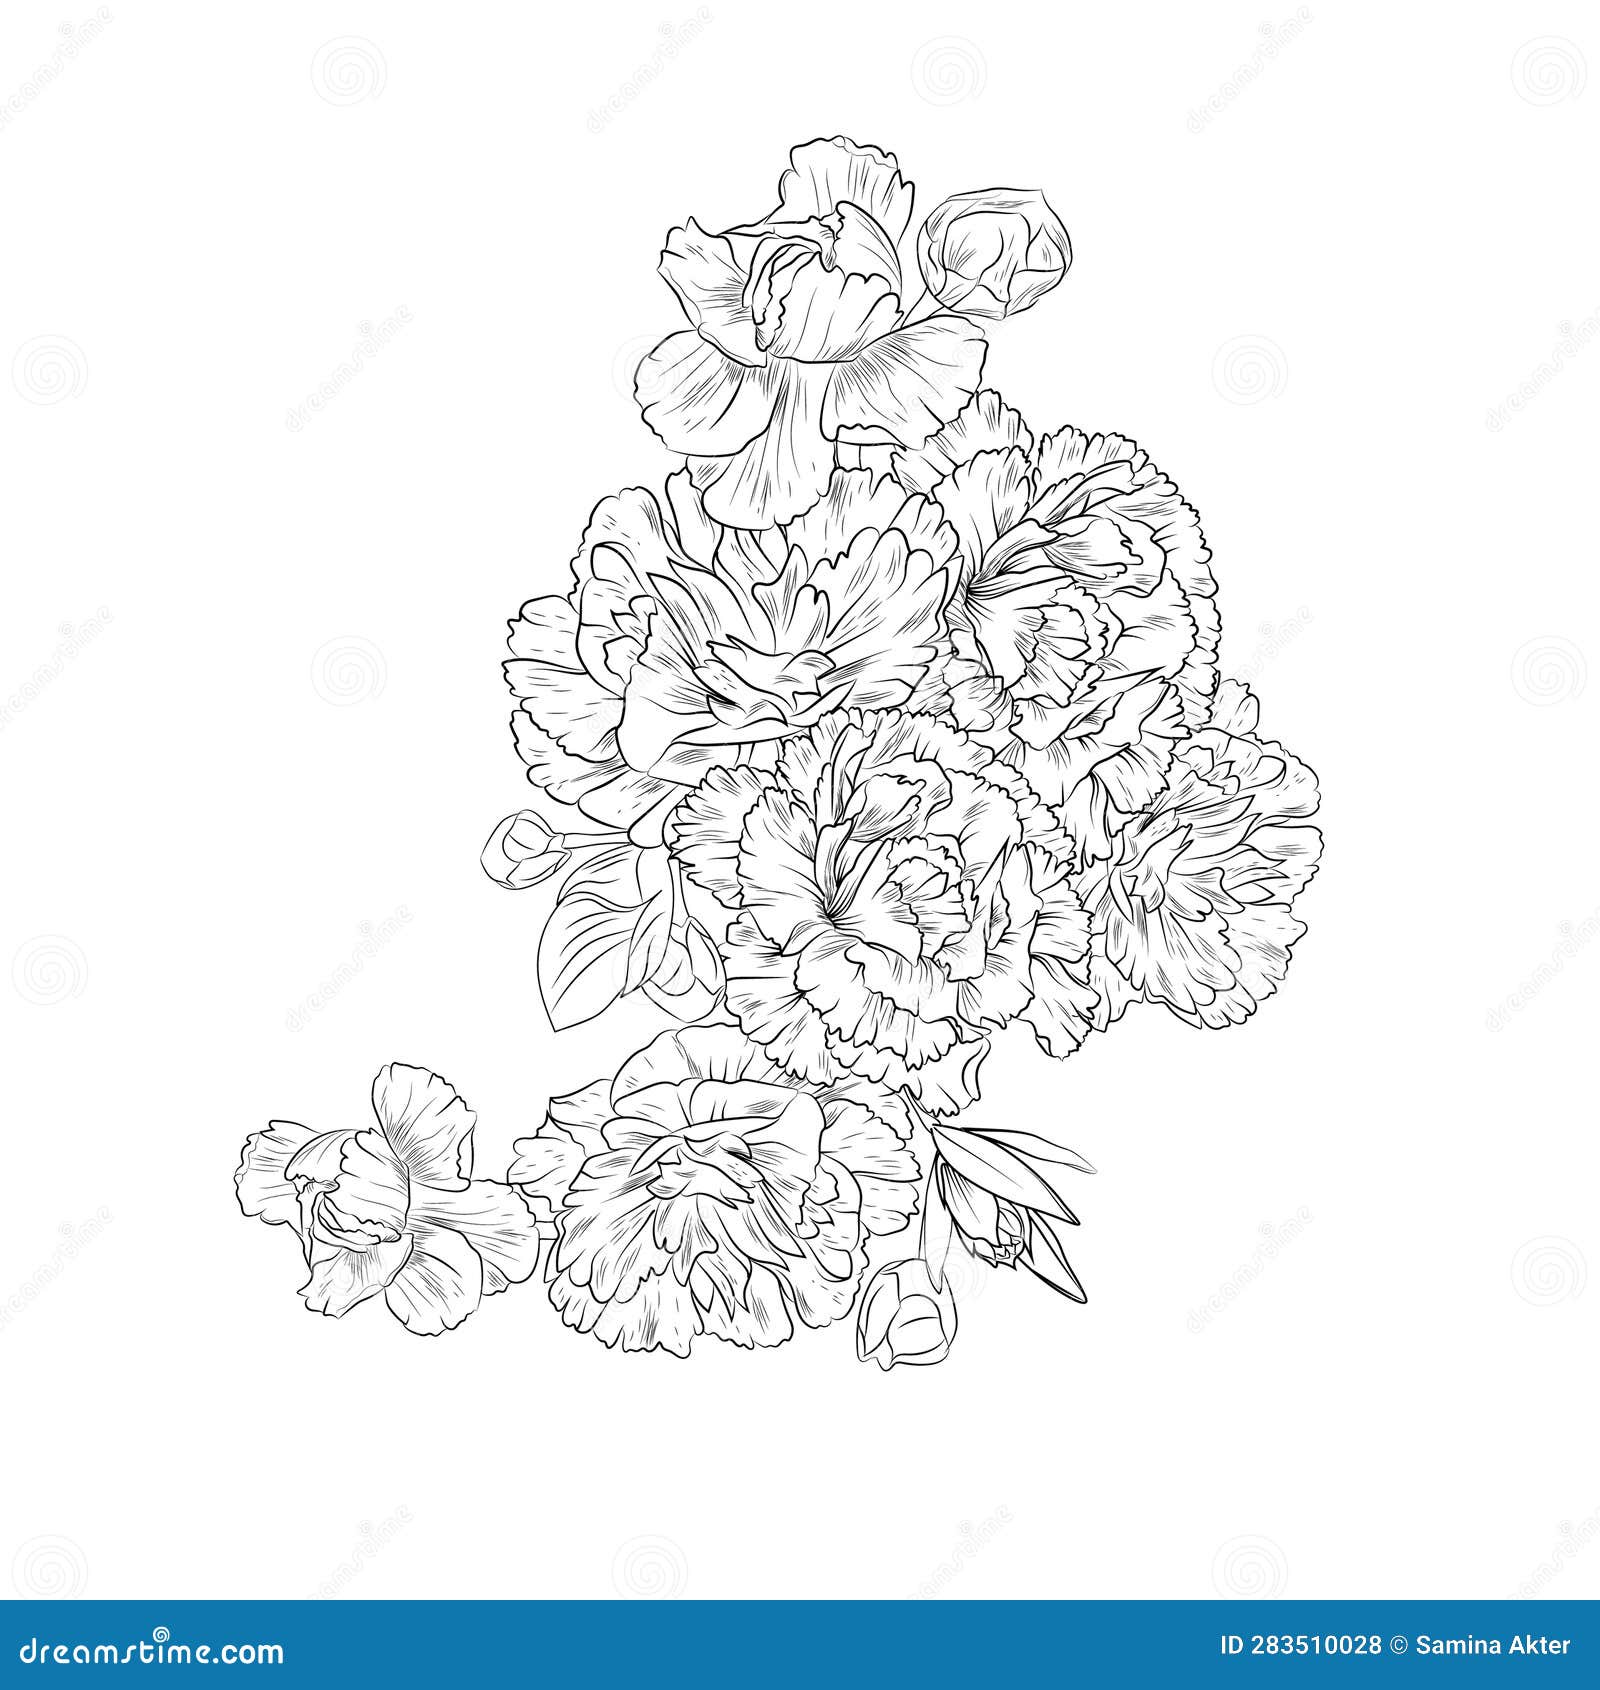 Outline Black Carnation Tattoo, Drawing Carnation Flower Tattoo Outline, Line Drawing Simple Carnation Tattoo Stock Vector - Illustration of sketch, tattoo: 283510028